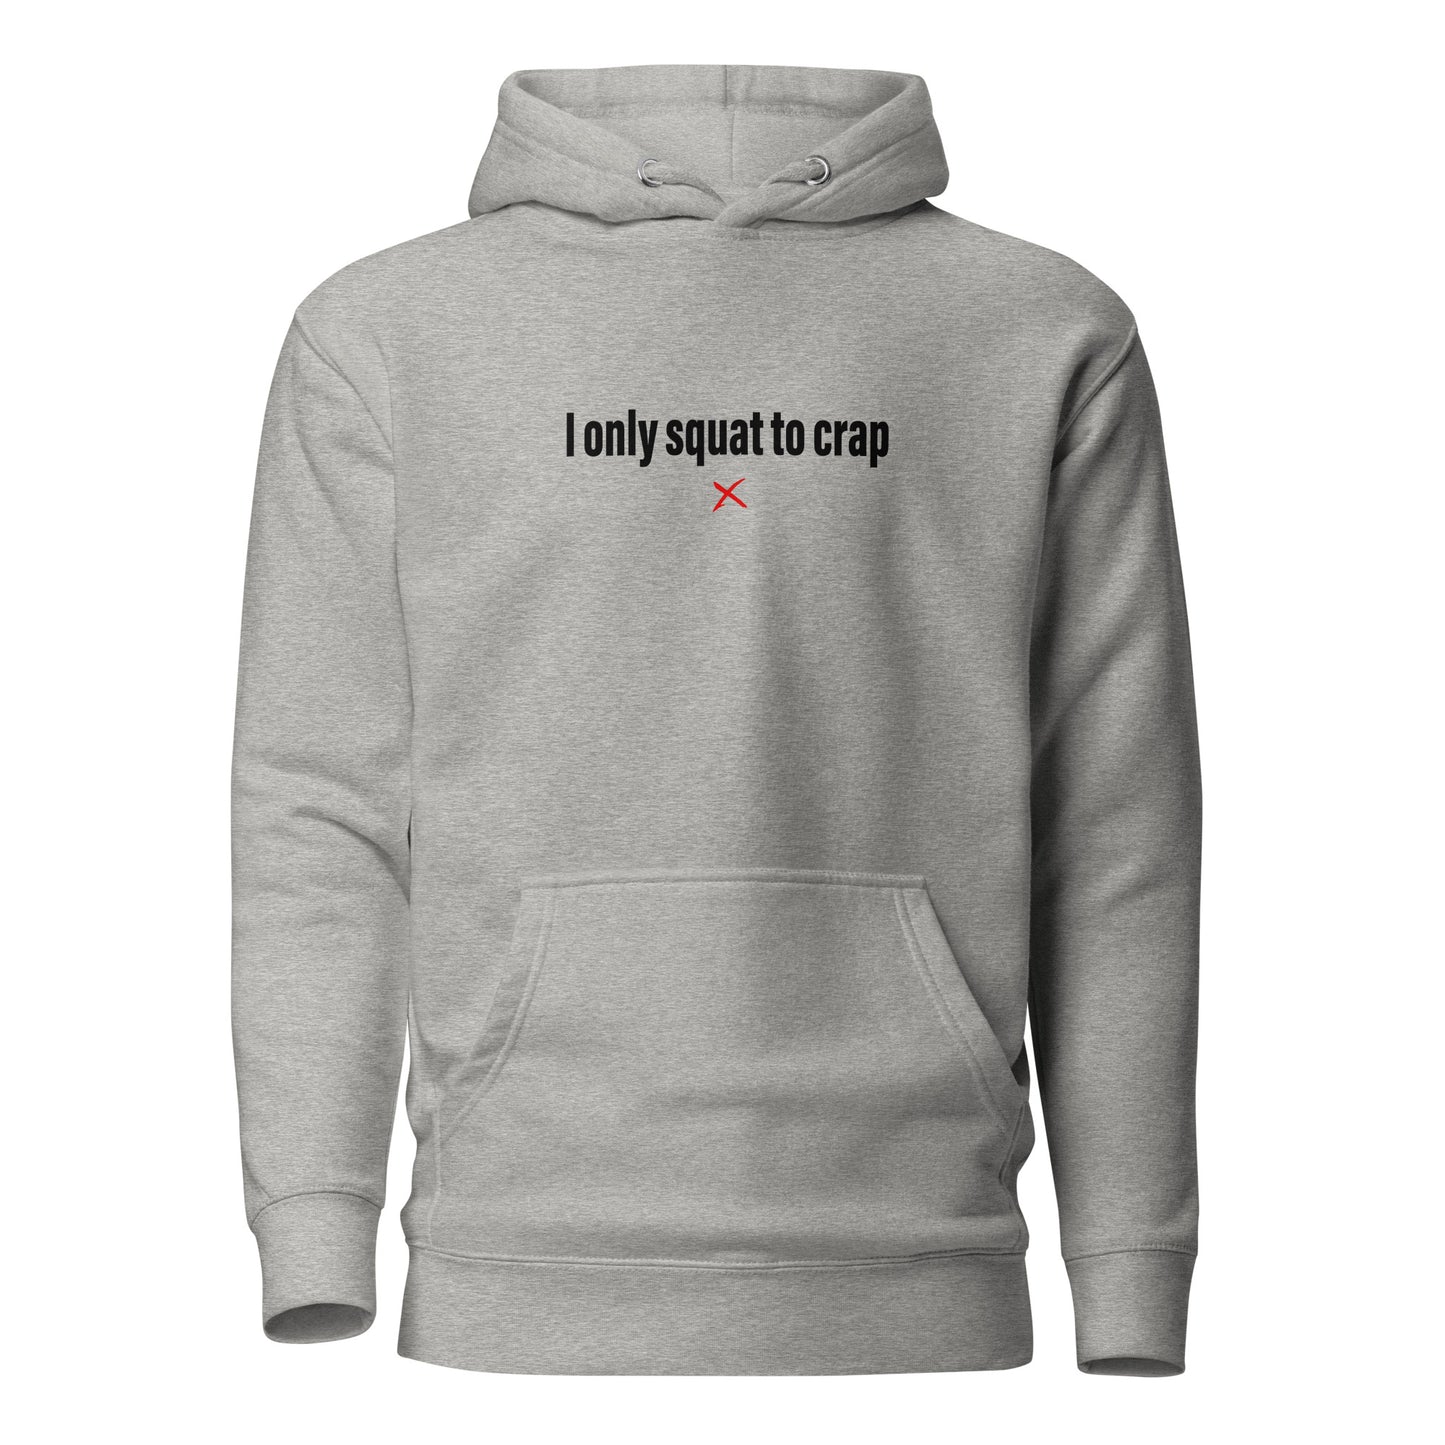 I only squat to crap - Hoodie